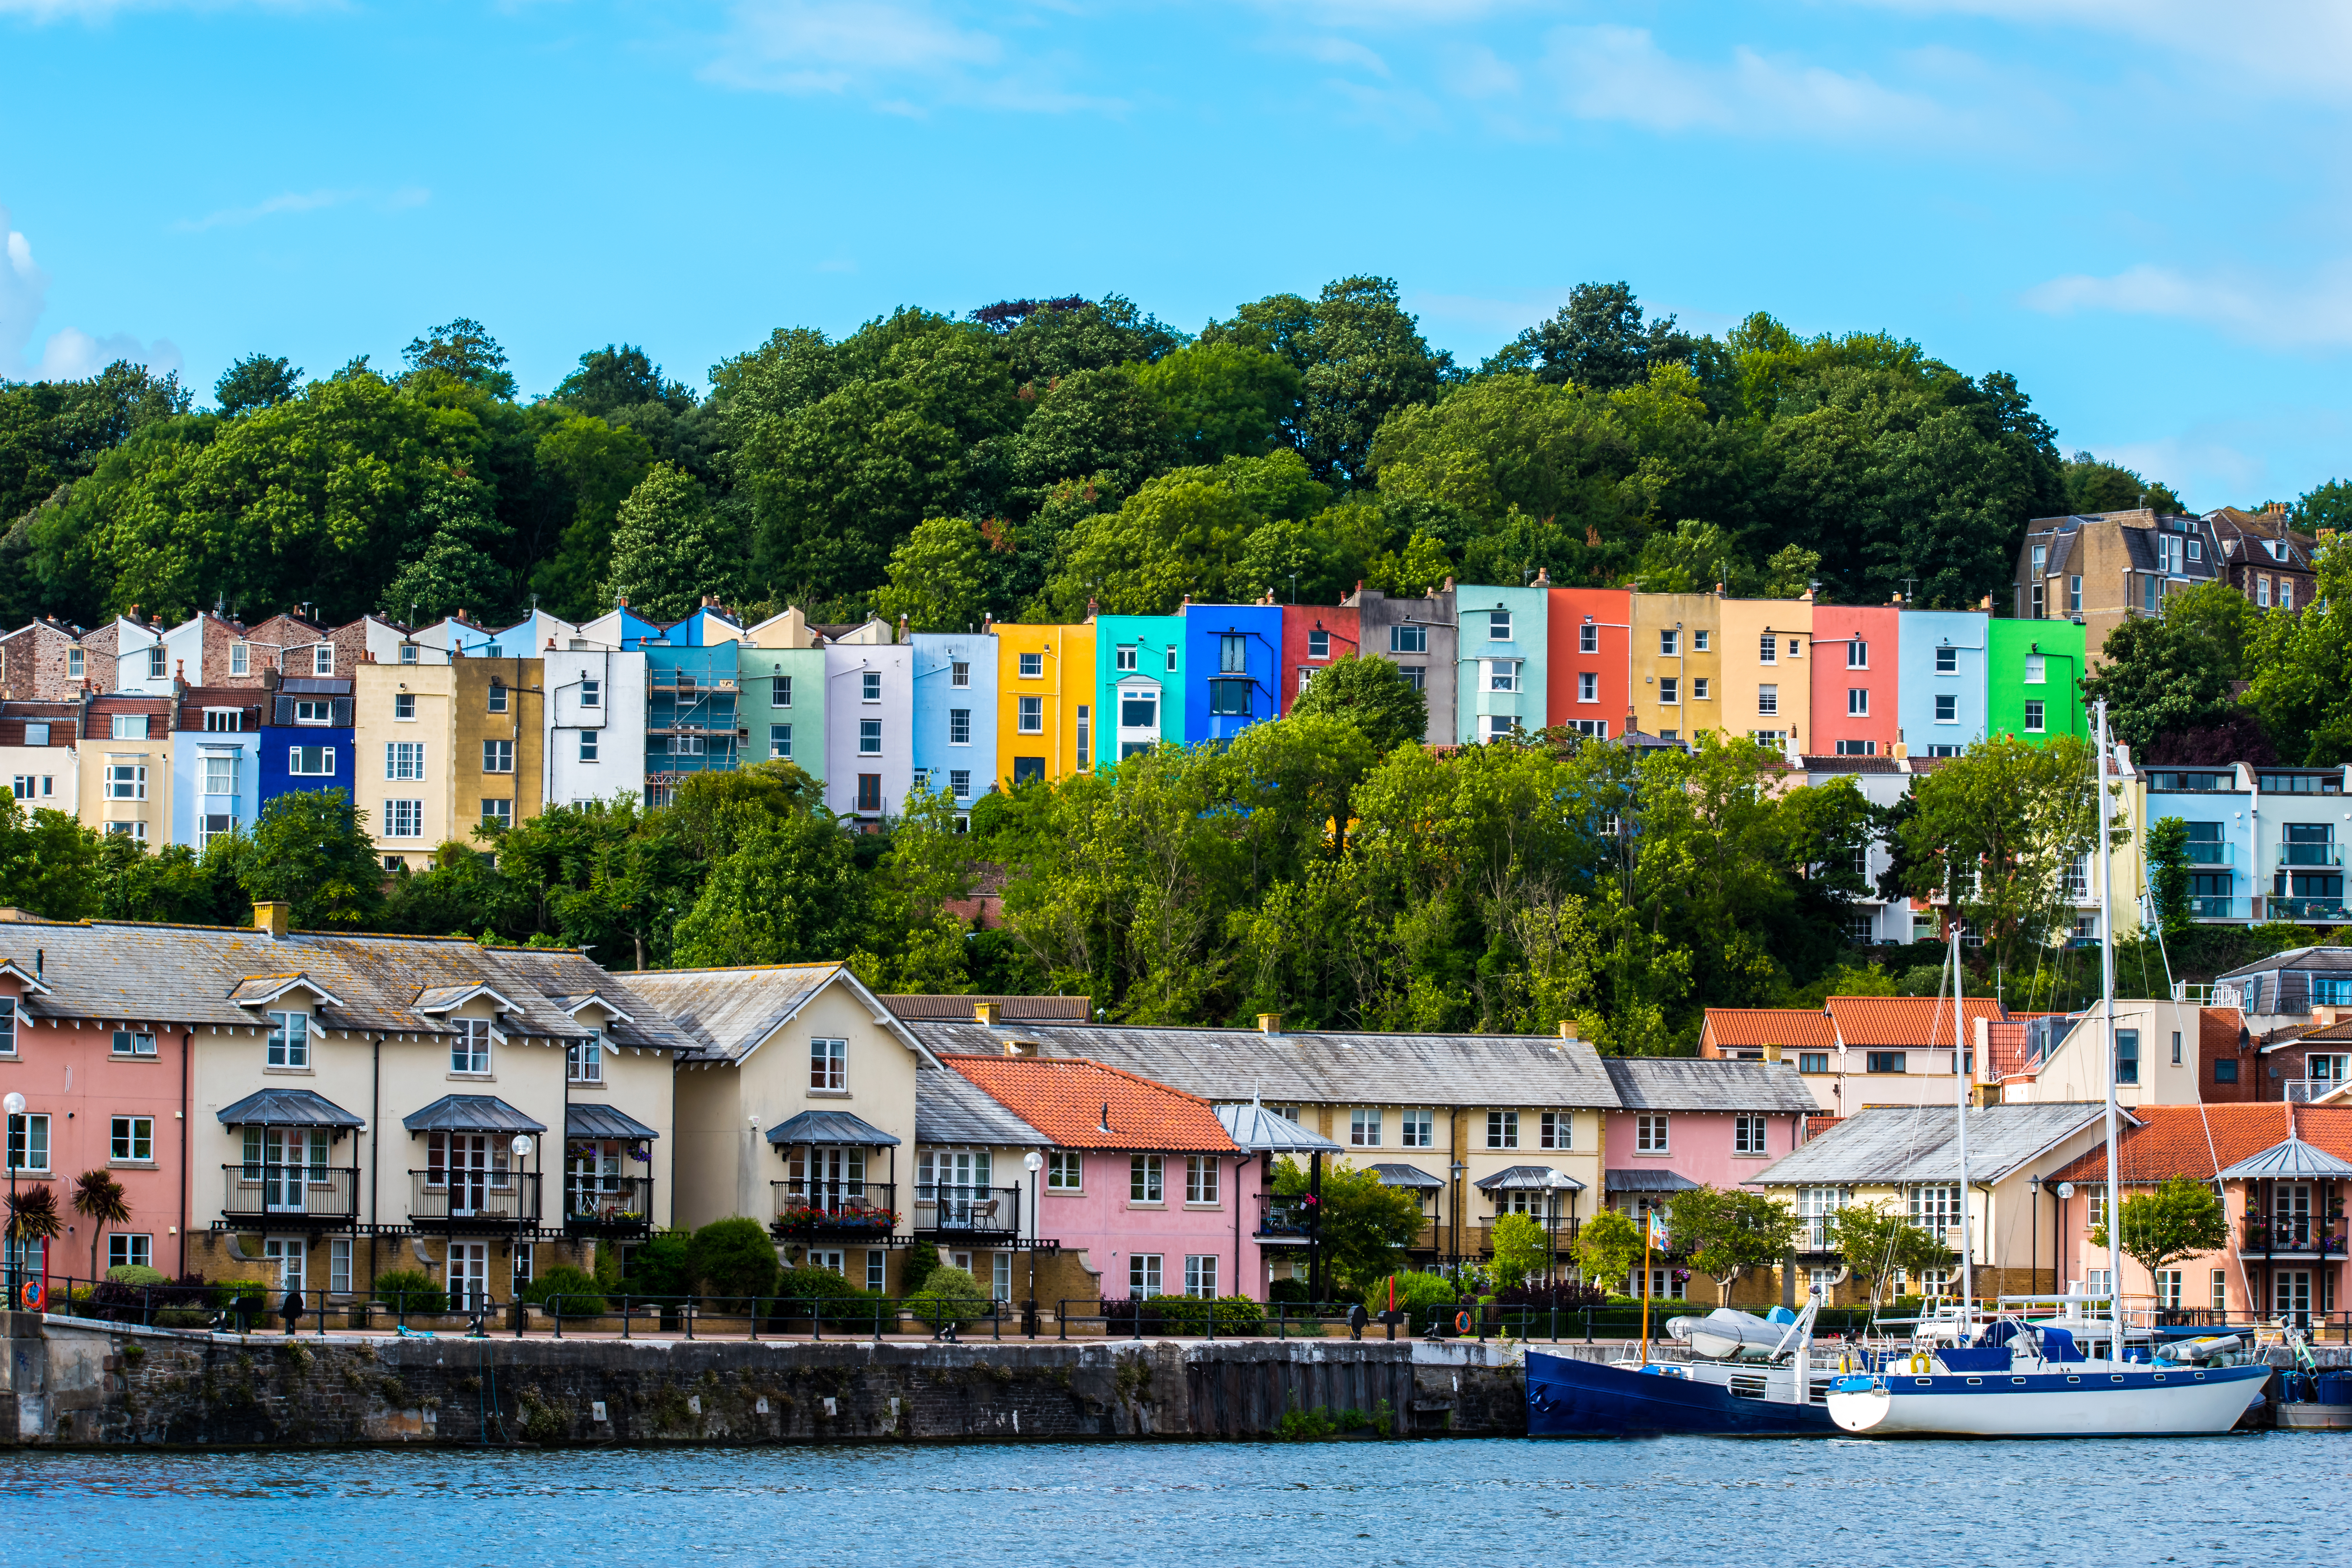 Colourful houses along the river in Bristol